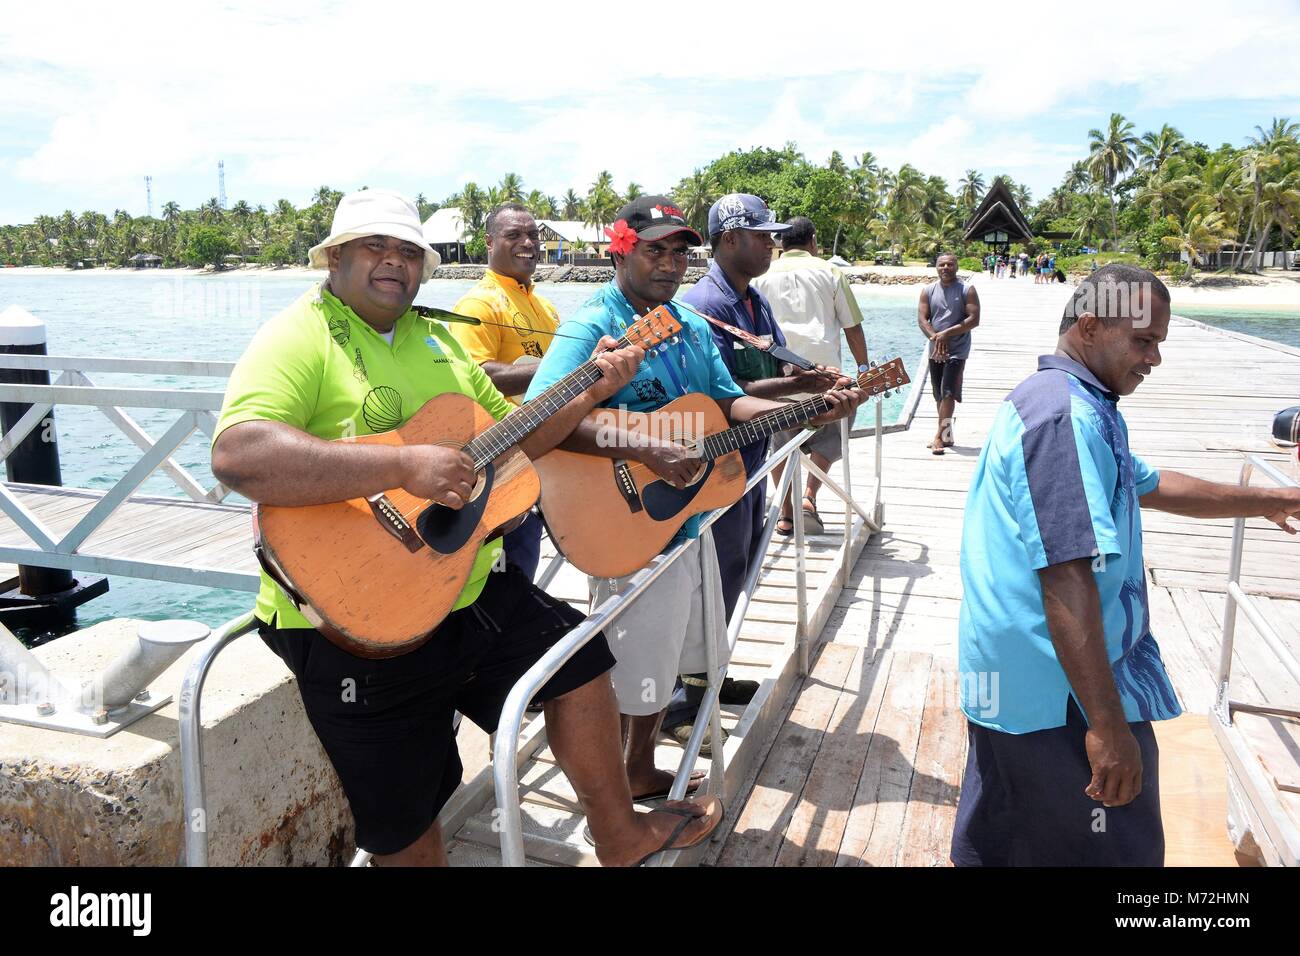 A band of Fijian singers welcome tourists on the beach when they arrive by boat to a beautiful island. They sing traditional Fijian welcome songs. Stock Photo